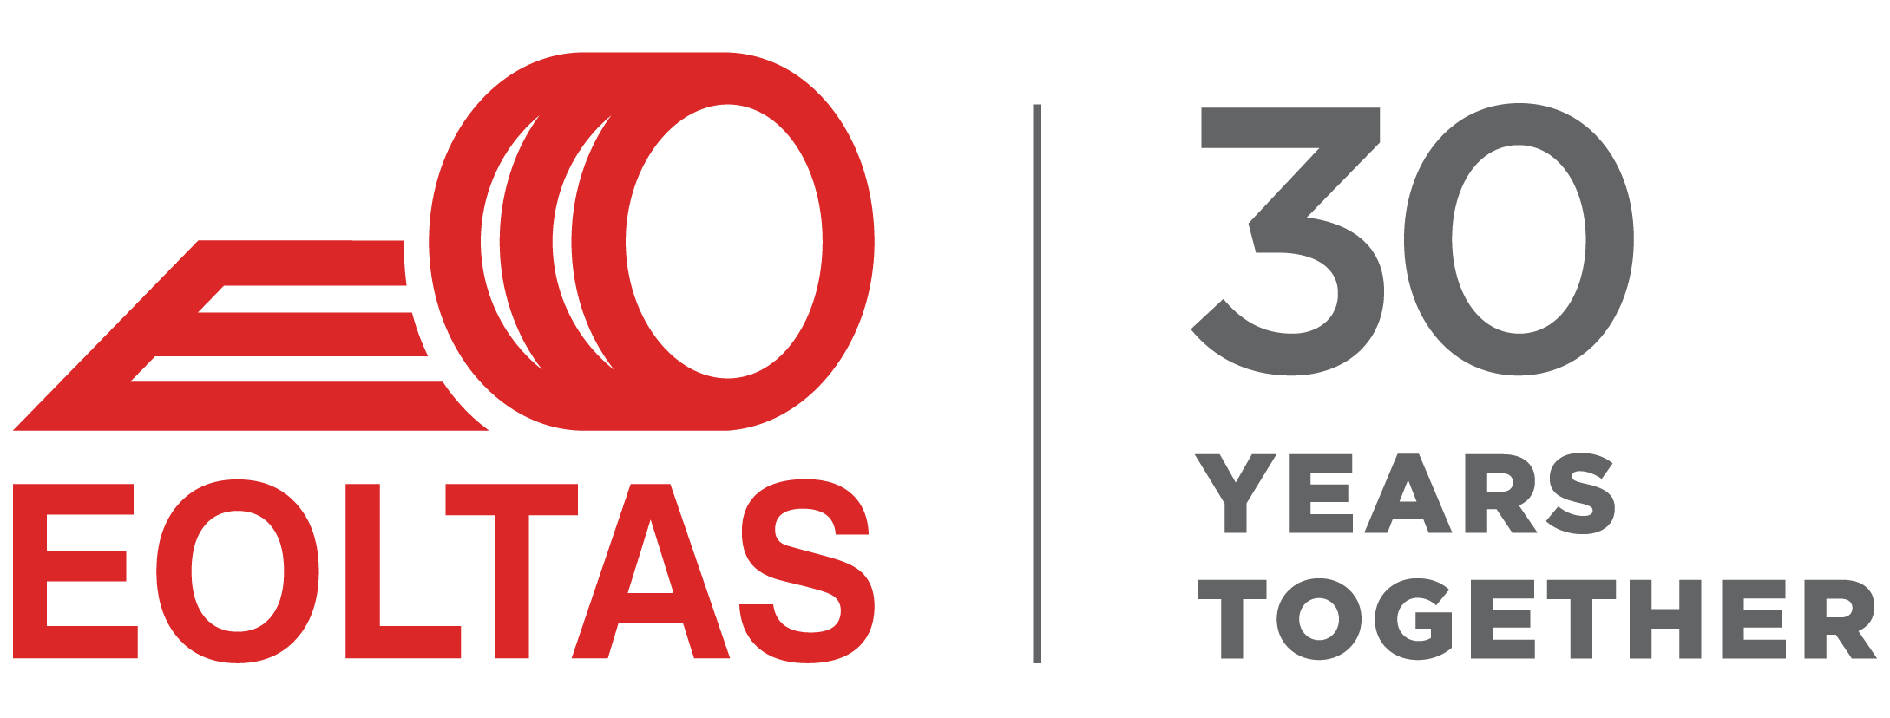 Eoltas | 30 years together